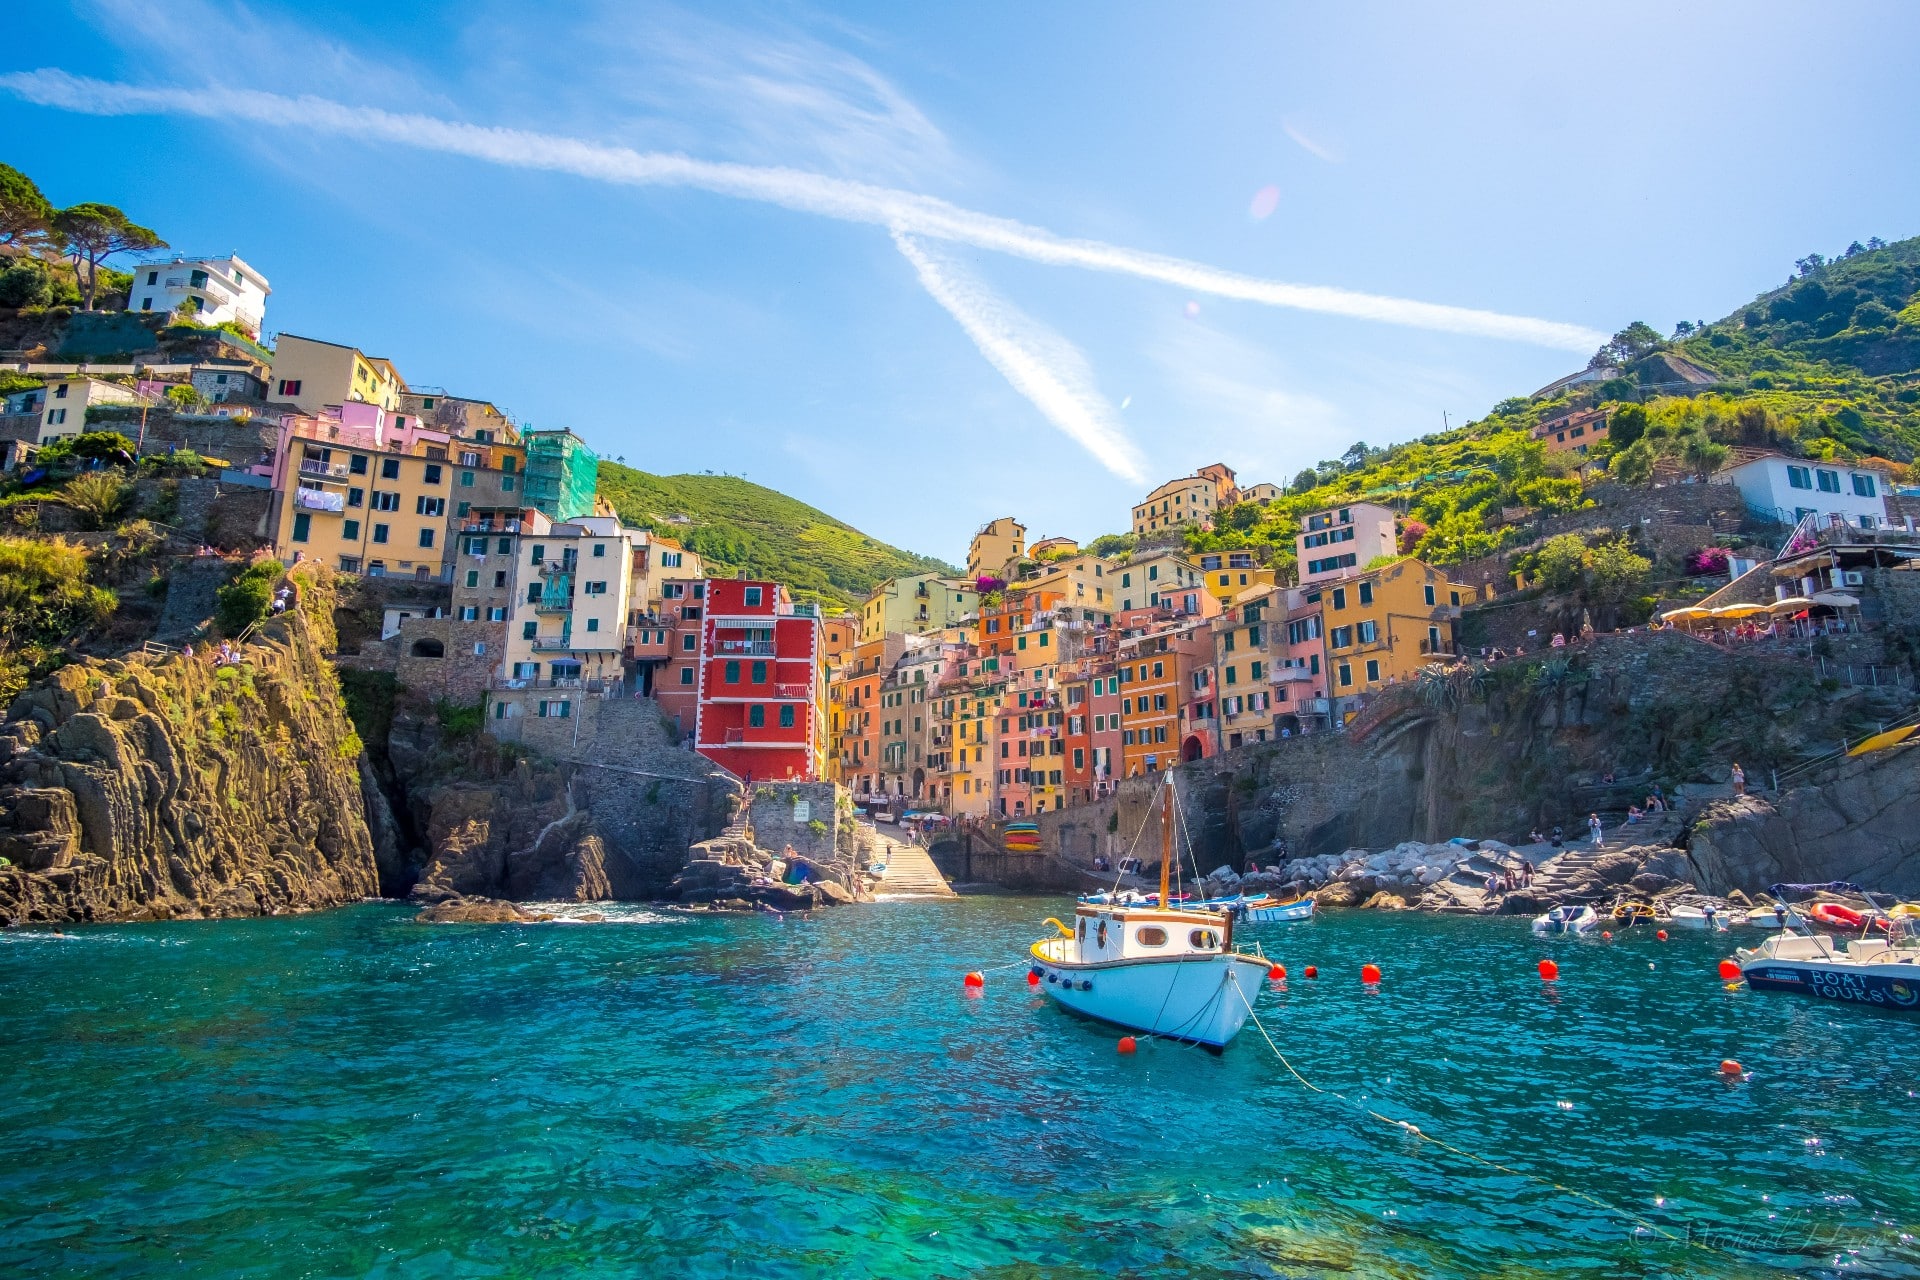 Cinque Terre, one of the most beautiful places to visit in ItalyCinque Terre, one of the most beautiful places to visit in Italy